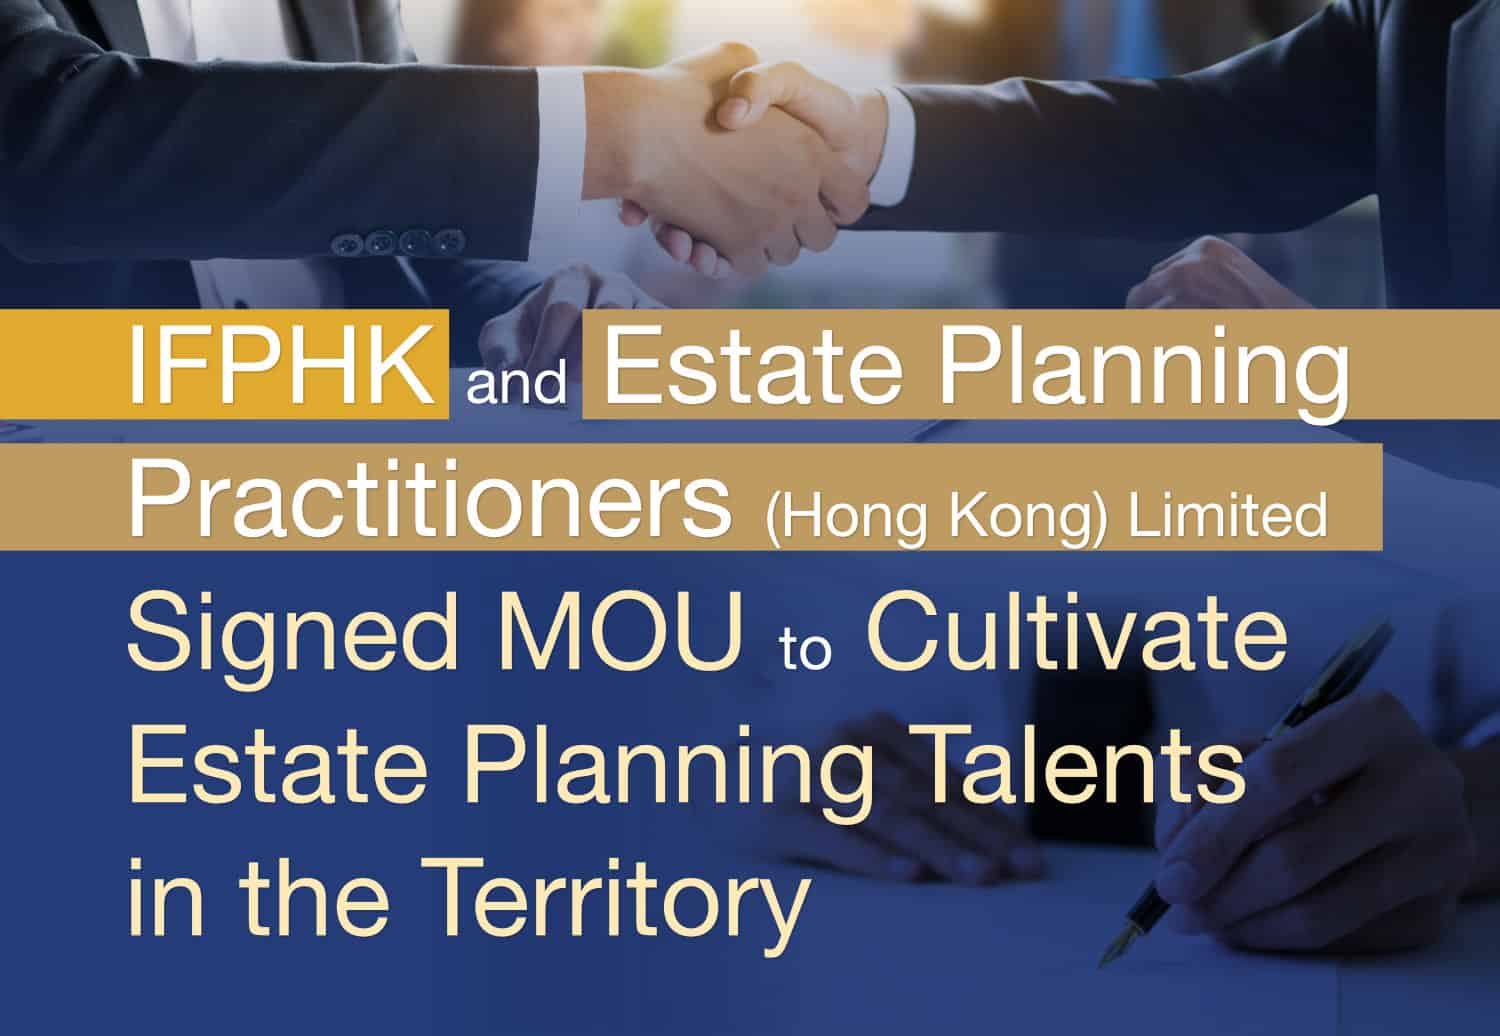 Two people shaking hands beneath a banner that reads, "IFPHK and Estate Planning Practitioners (Hong Kong) Limited Signed MOU to Cultivate Estate Planning Talents in the Territory.